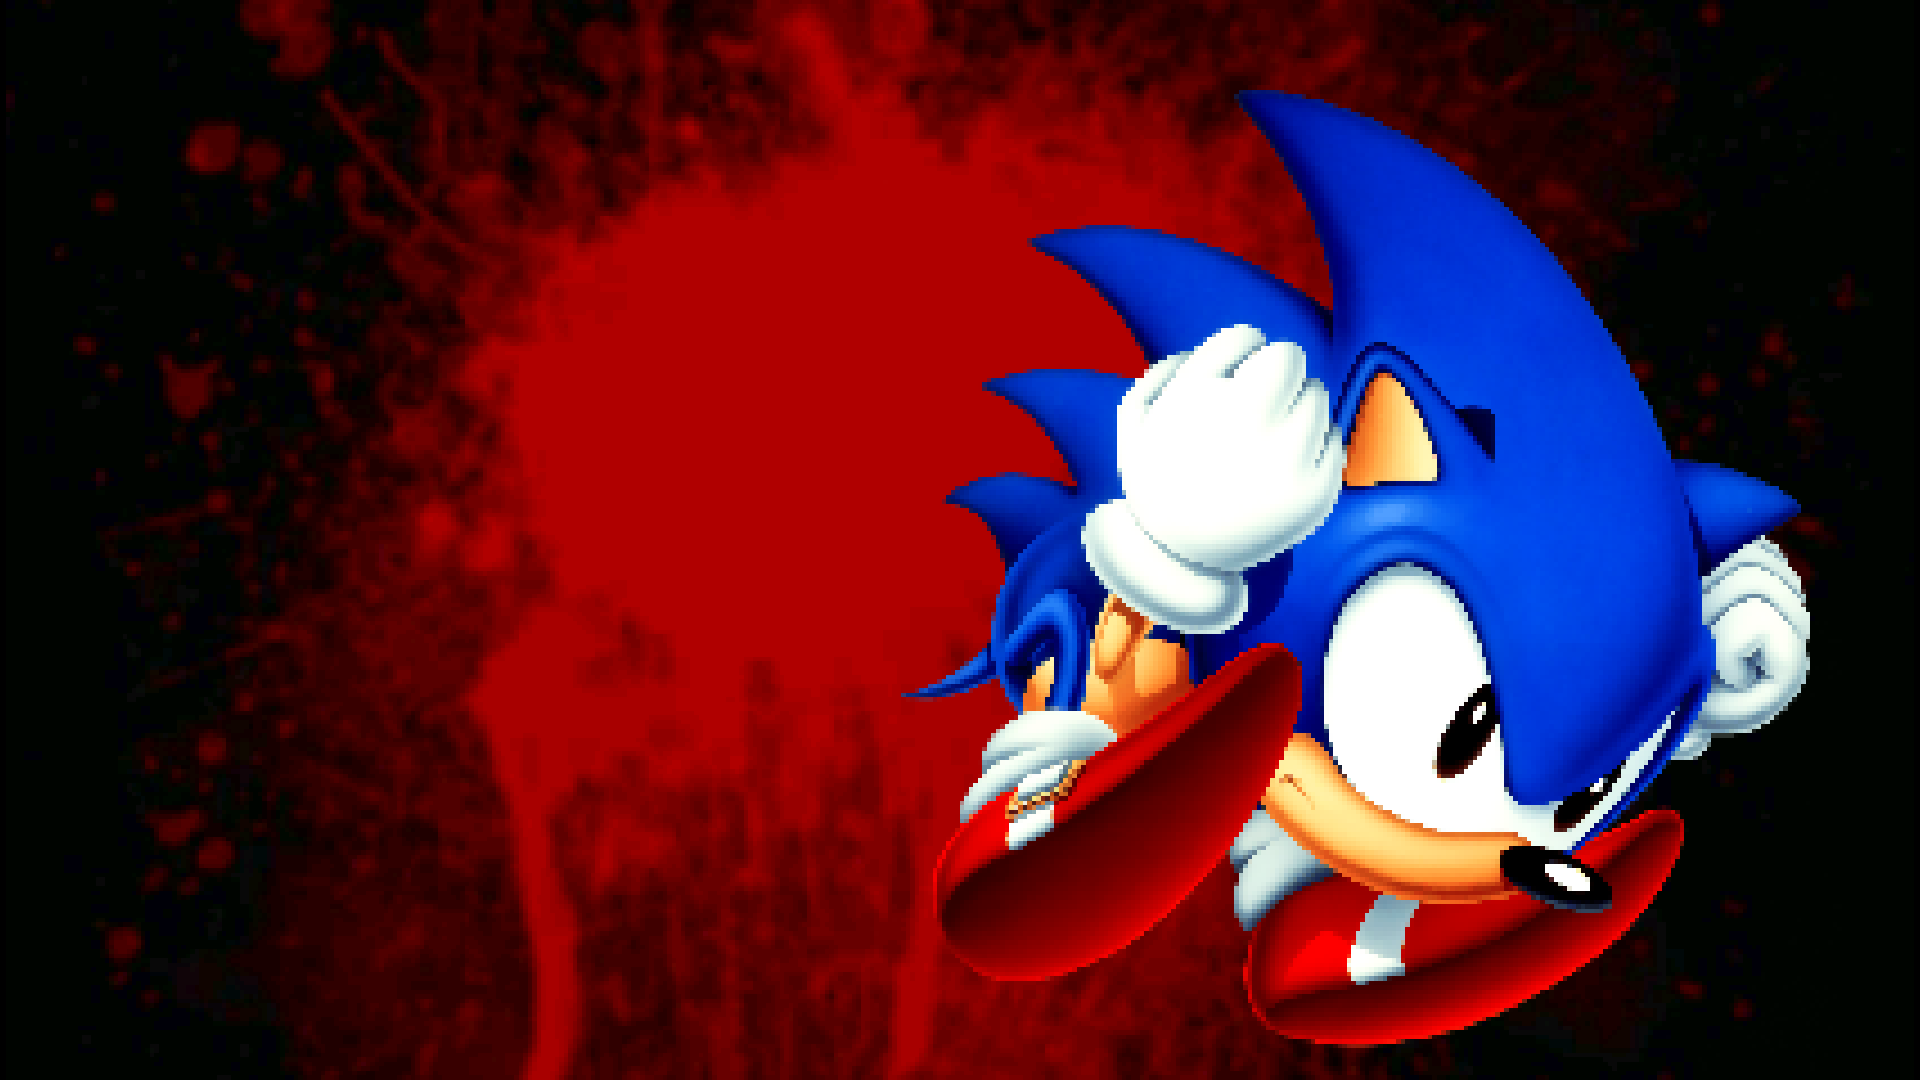 Download Dive into the exciting world of the Sonic Exe game Wallpaper